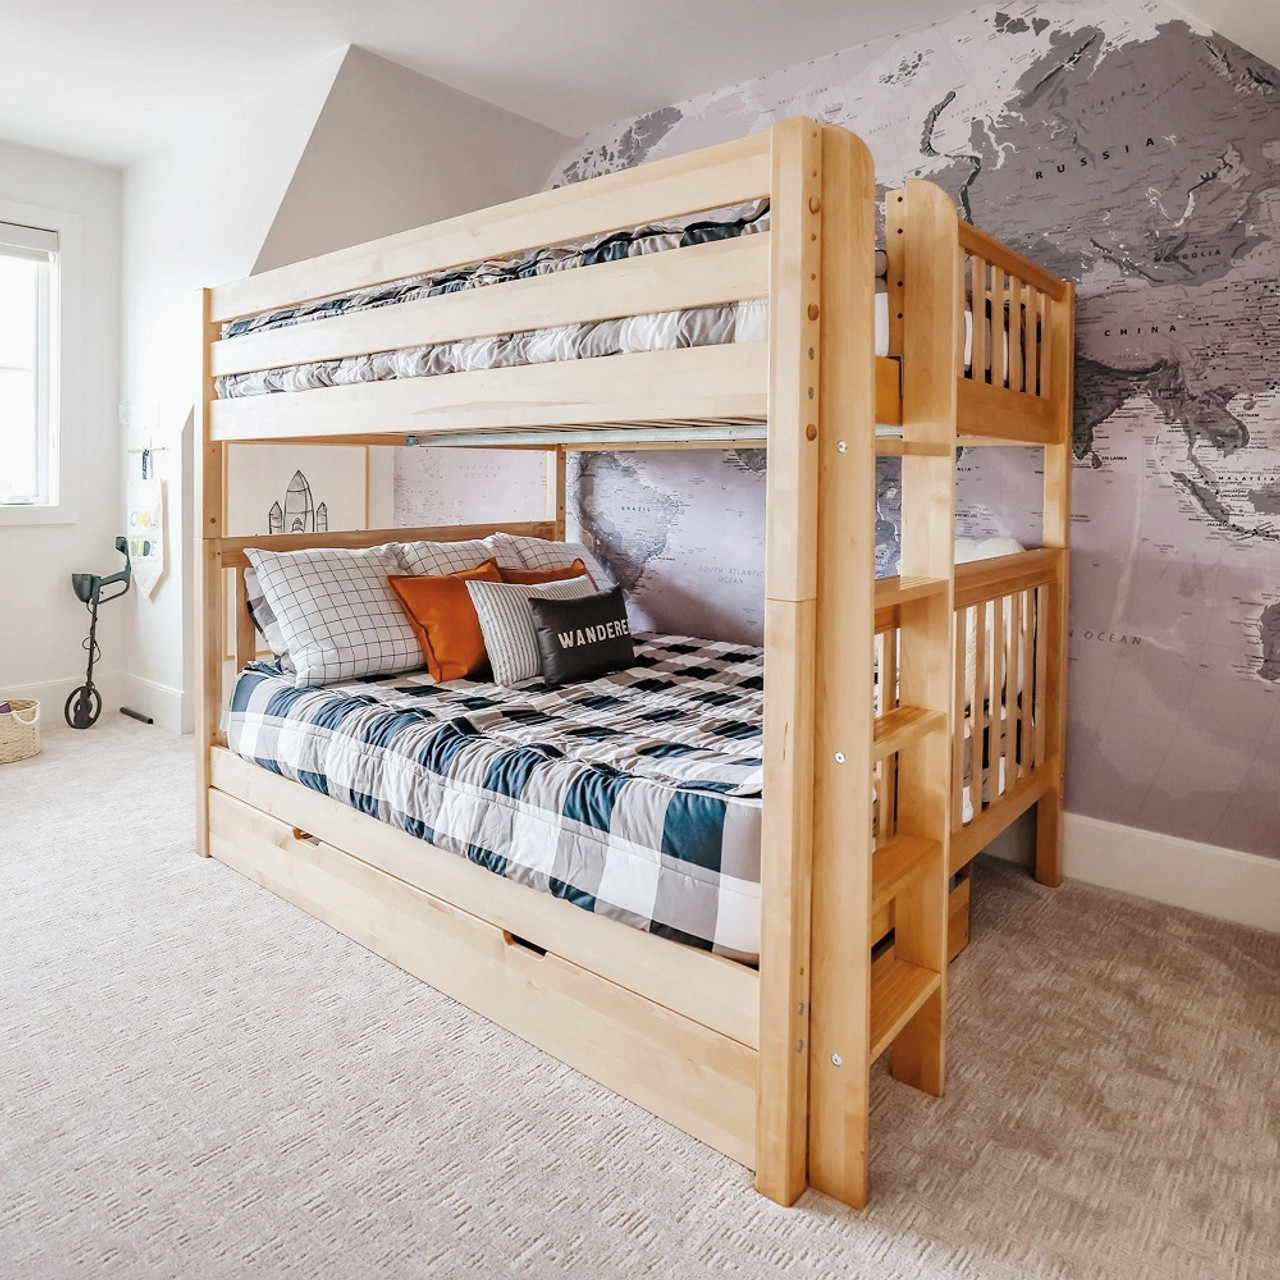 Converting Your Bed Sheets for Trundle and Bunk Beds